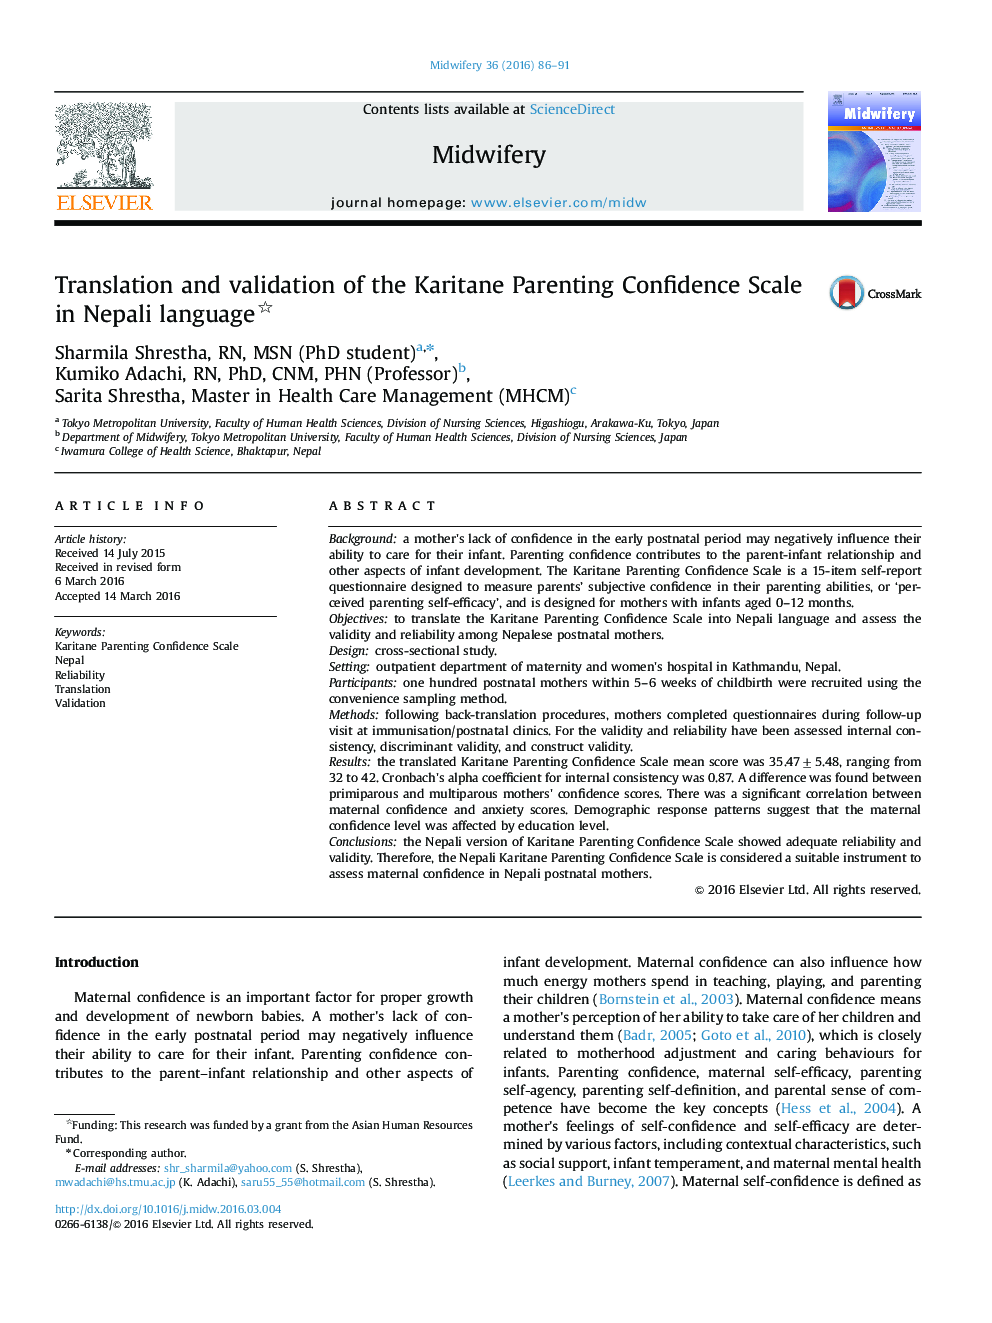 Translation and validation of the Karitane Parenting Confidence Scale in Nepali language